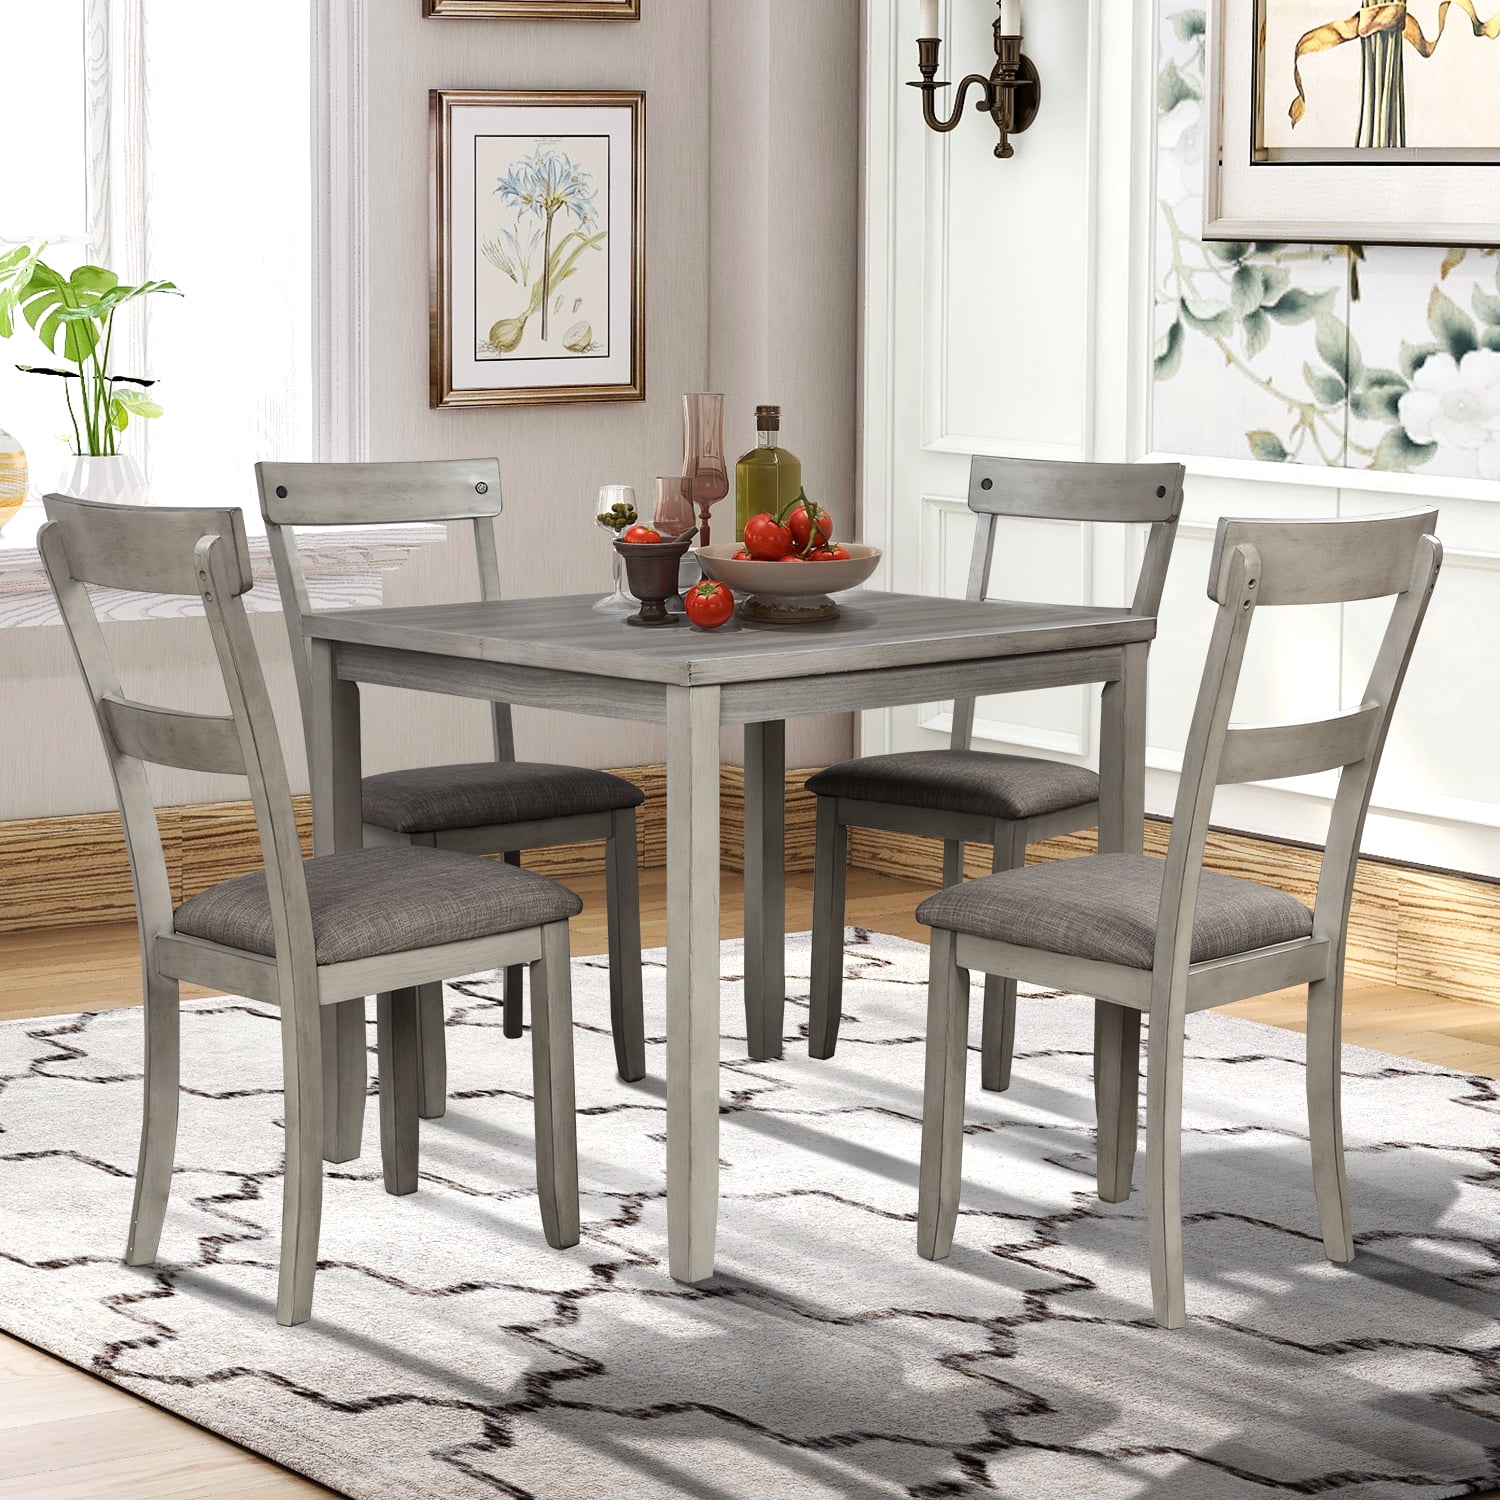 Kitchen Dining Room Table Sets, Kitchen Table And Chair Set For 4 Persons